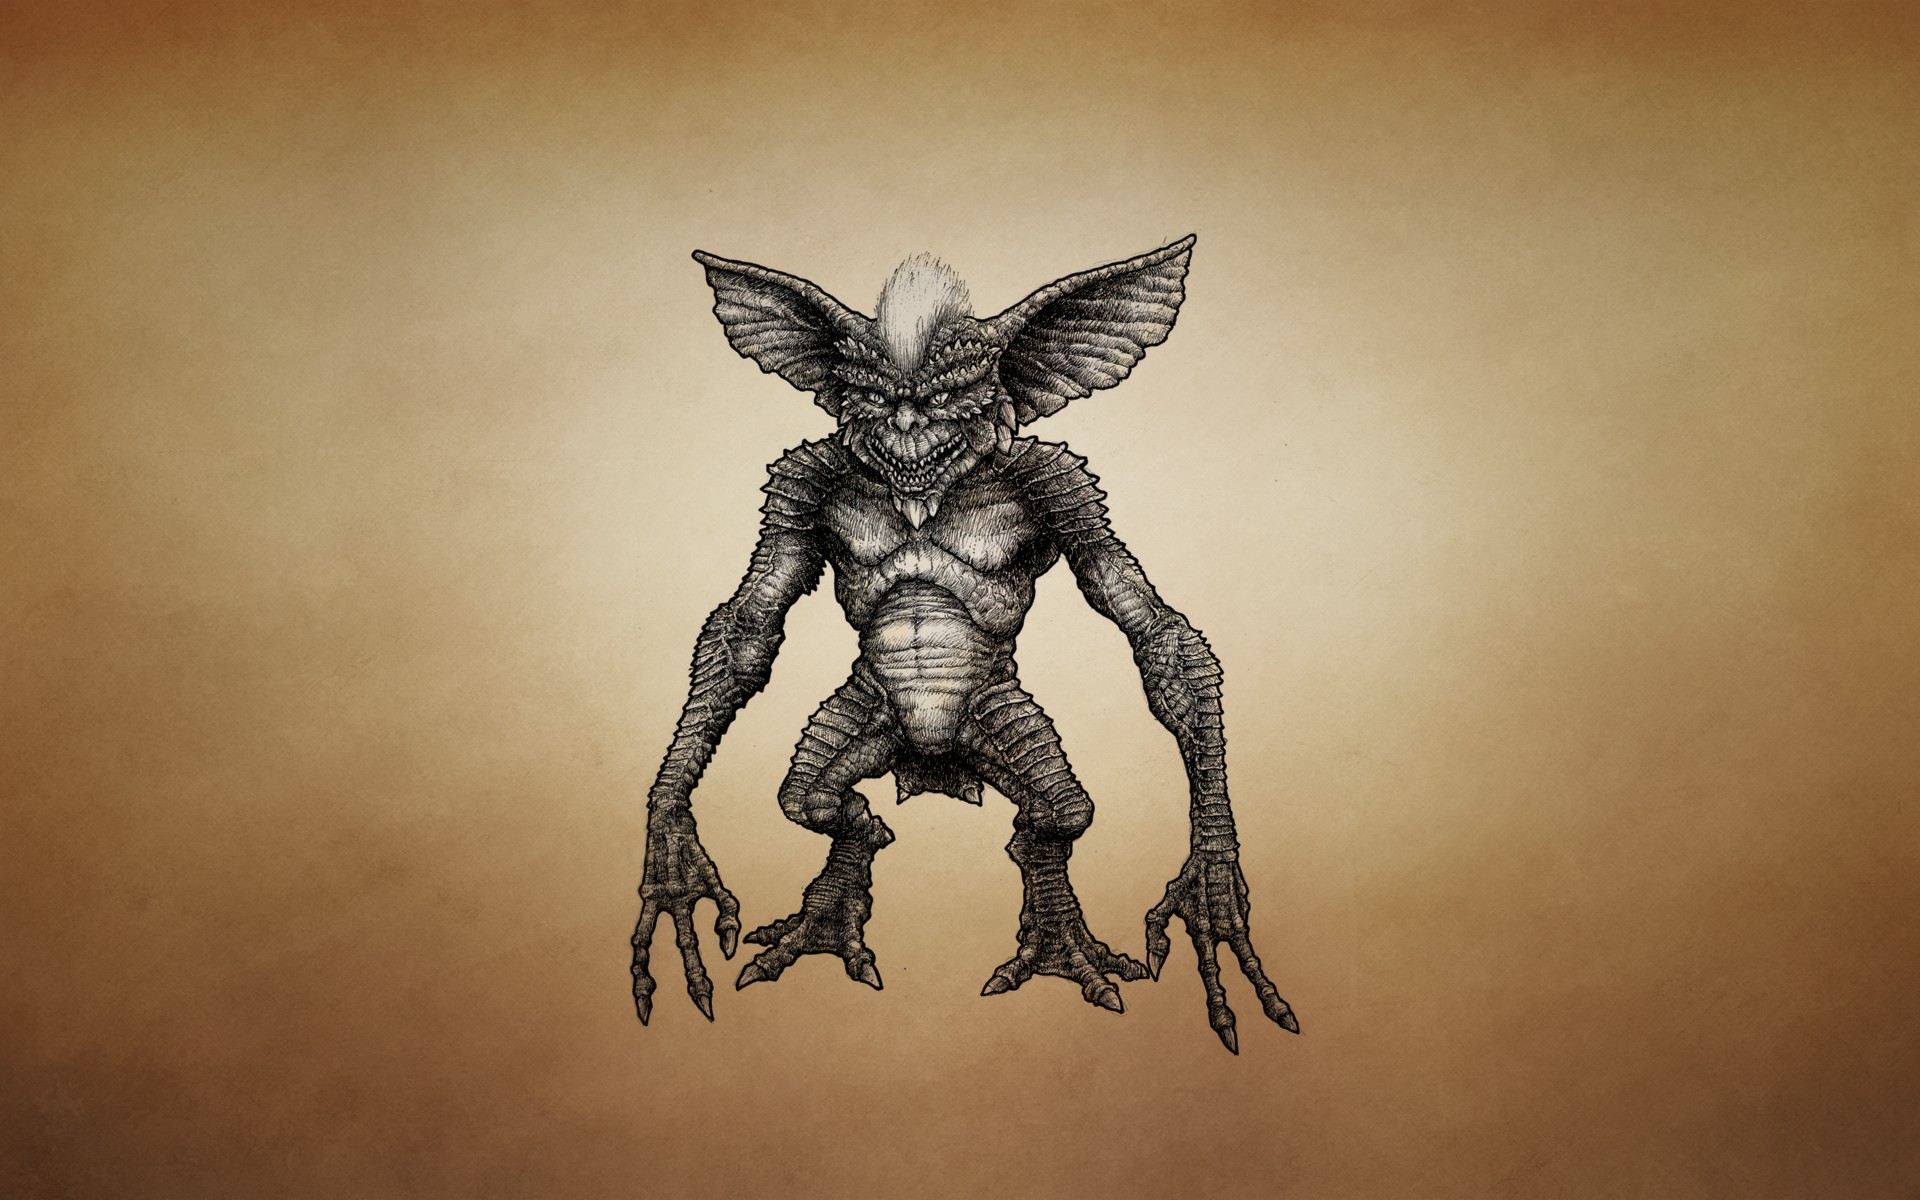 Gremlin Art Texture Wallpaper Hd Fantasy 4k Wallpapers Images Photos And Background Wallpapers Den